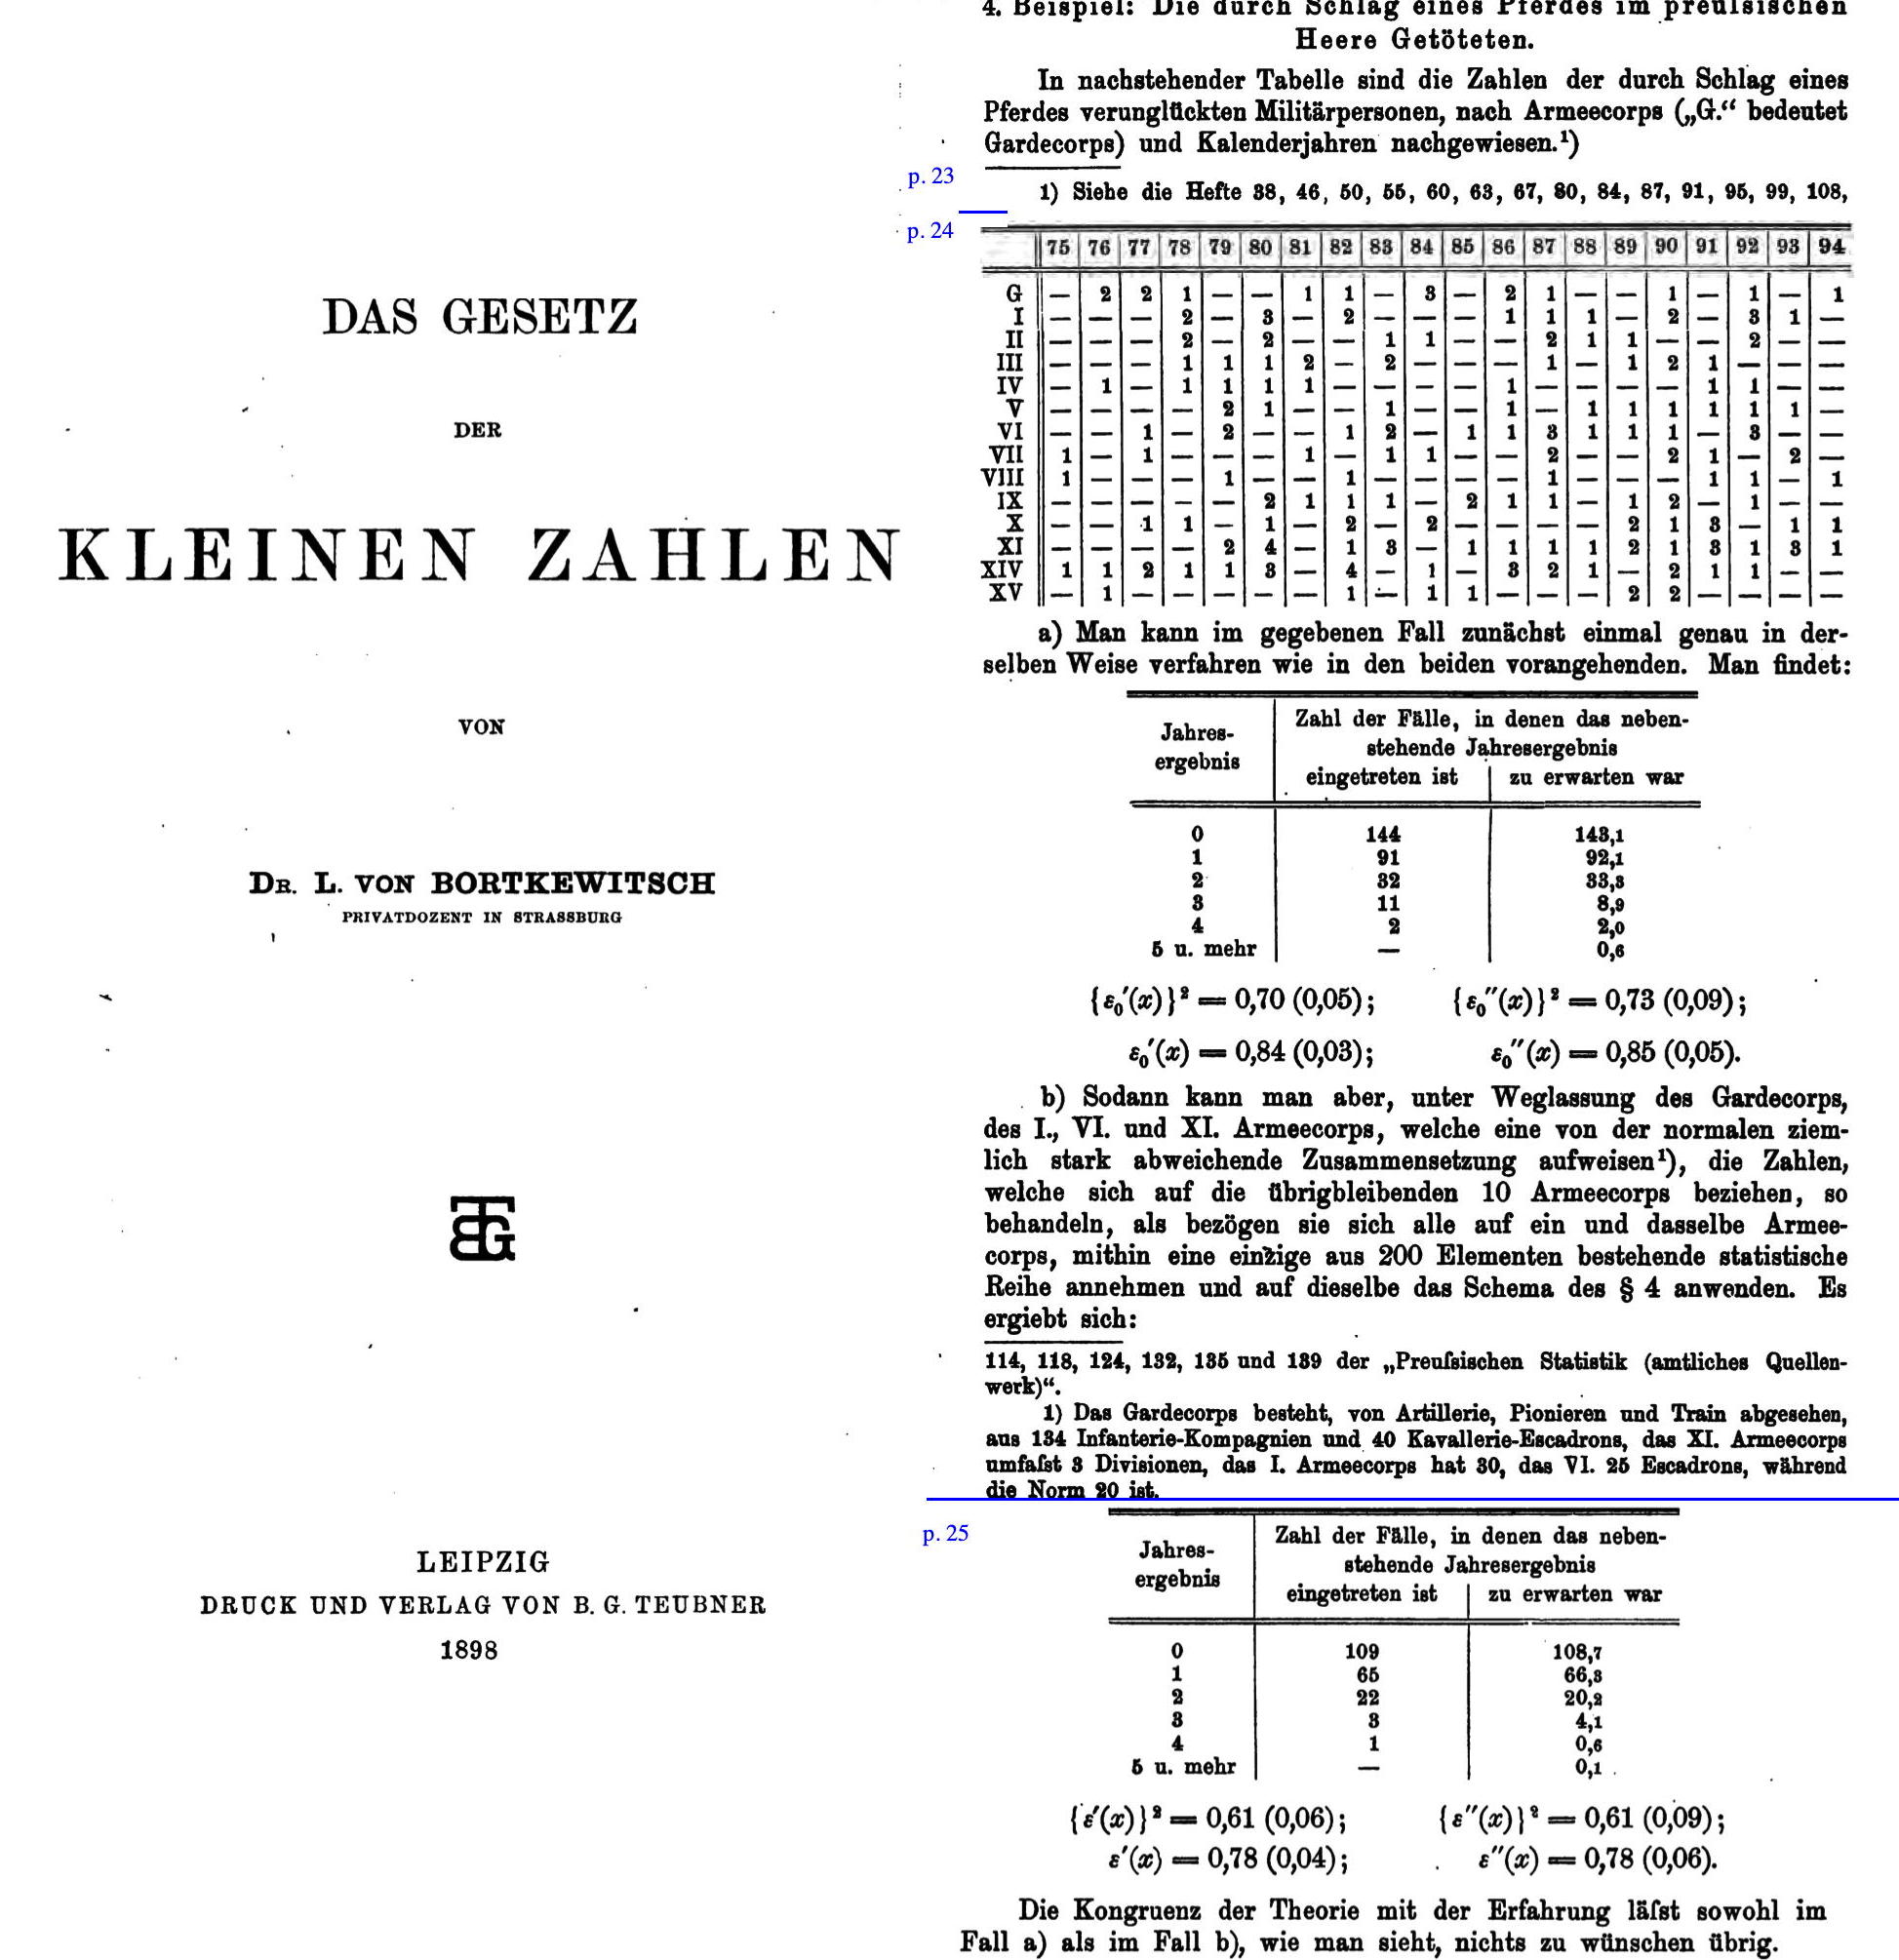 Section 12 of Bortkewitsch1898 book on the Poisson Distribution. The numbers 